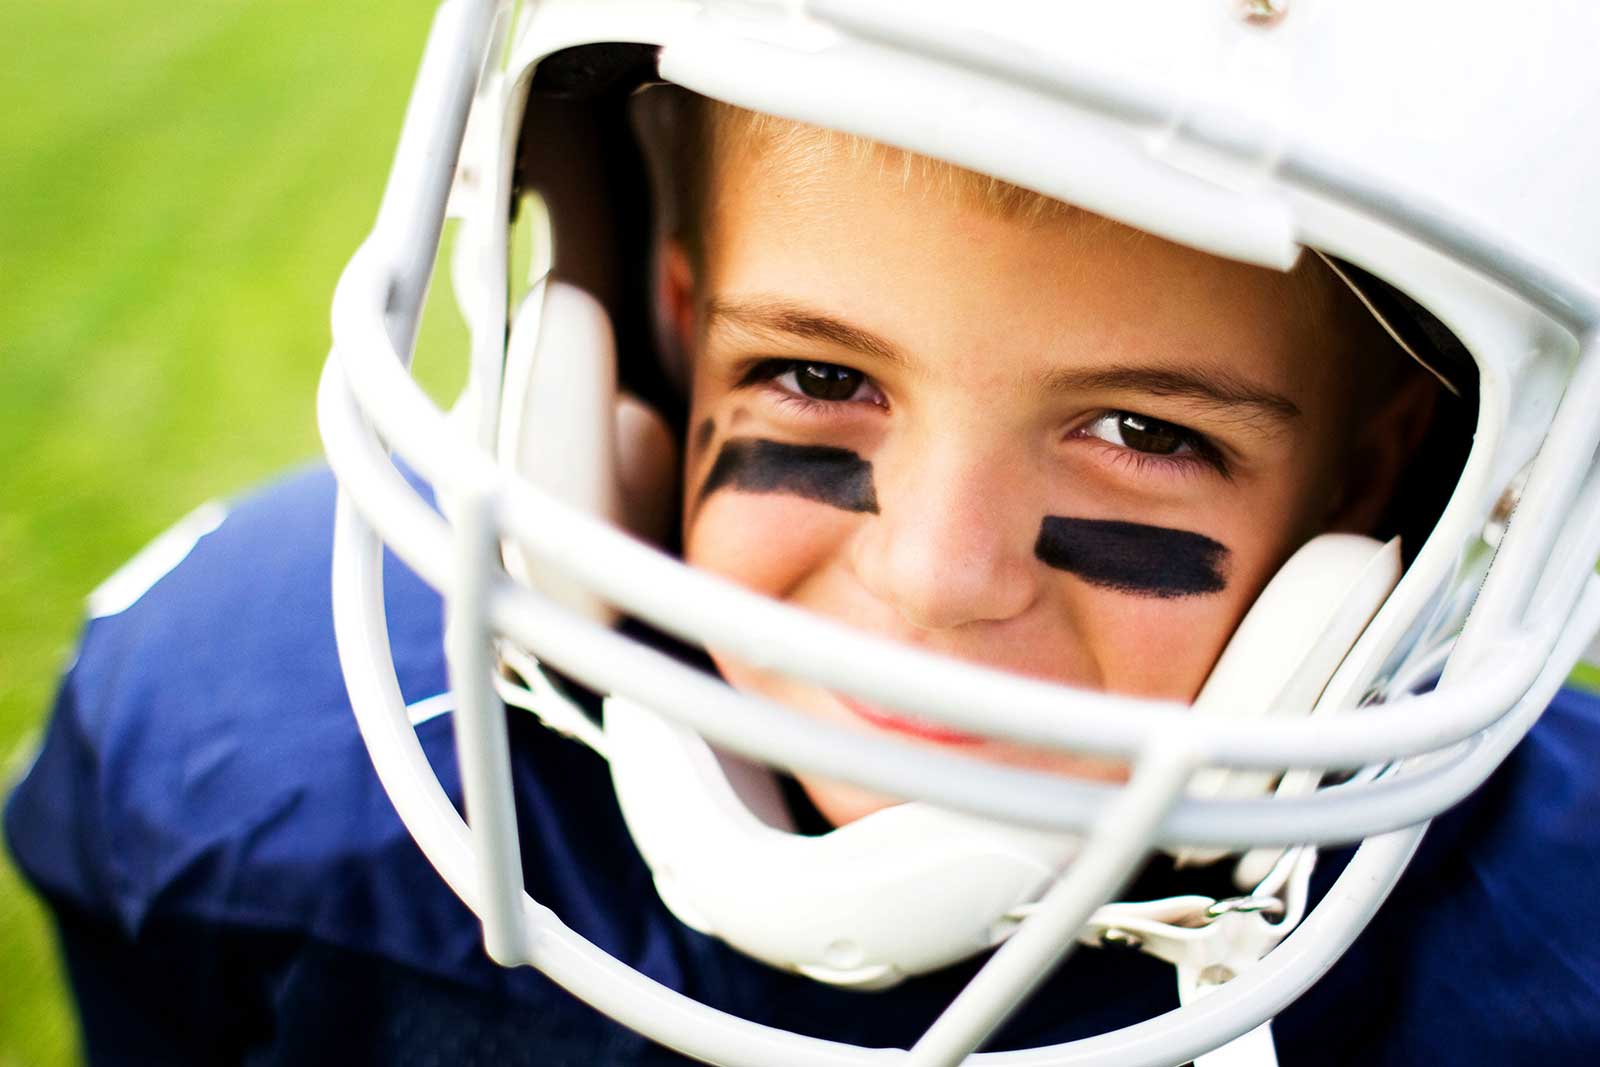 kids and concussions